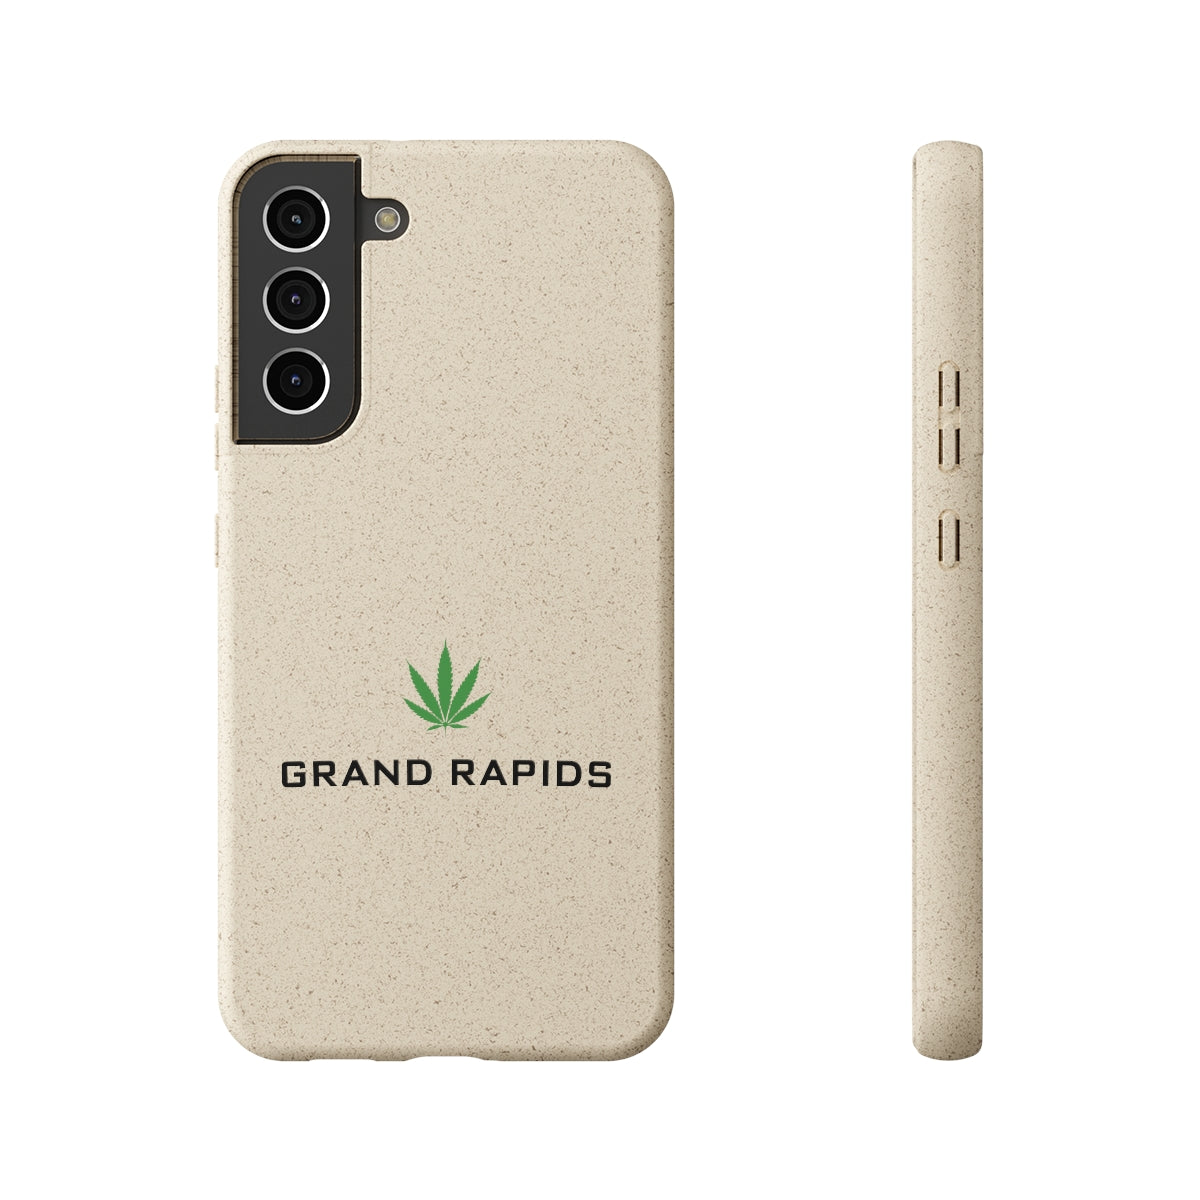 'Grand Rapids' Phone Cases (w/ Cannabis Leaf) | Android & iPhone